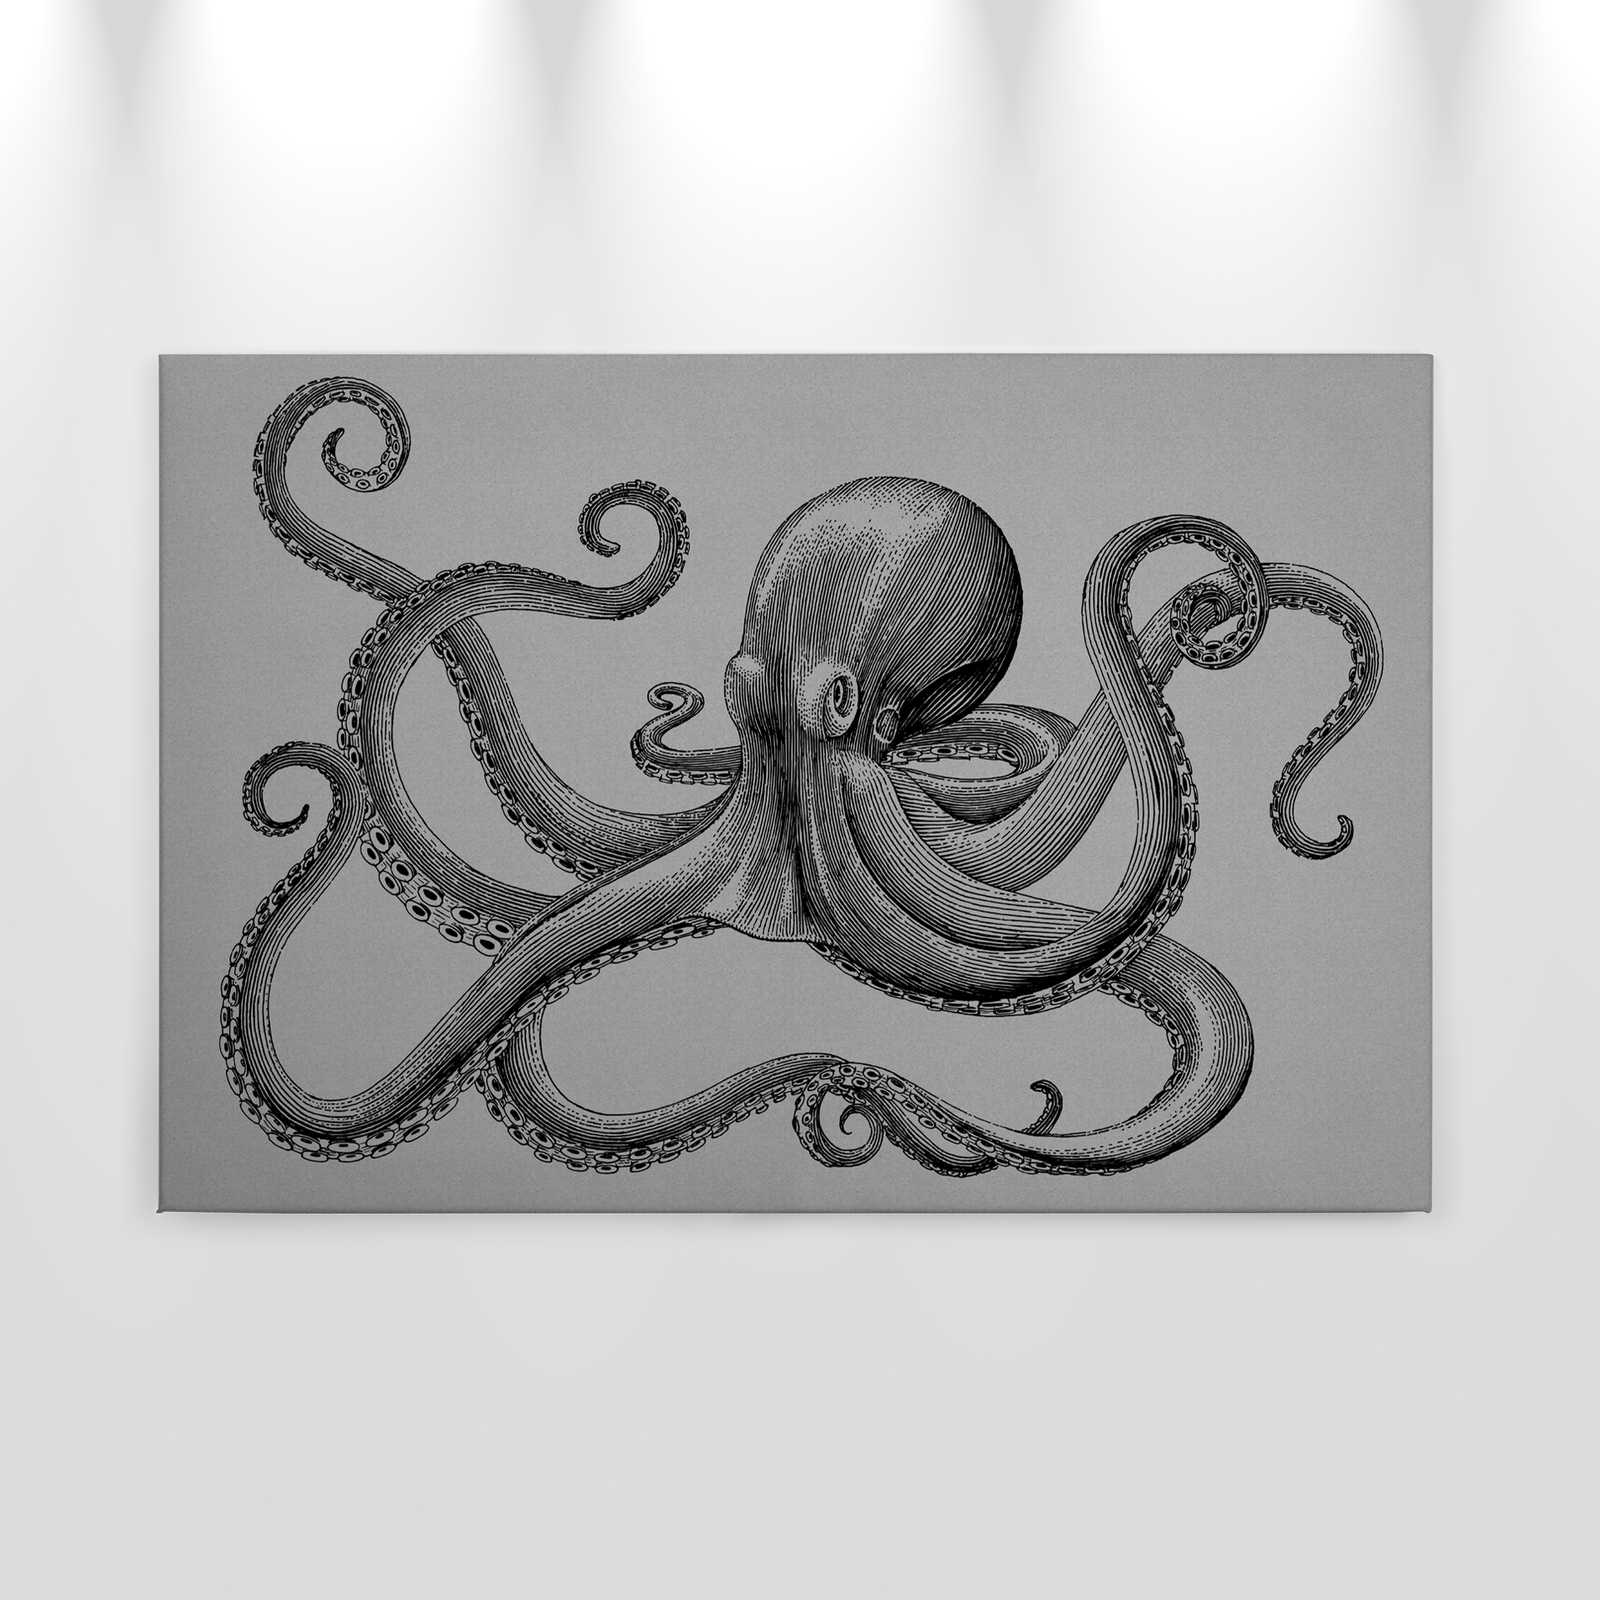             Jules 2 - modern octopus canvas picture in cardboard structure in drawing style - 0.90 m x 0.60 m
        